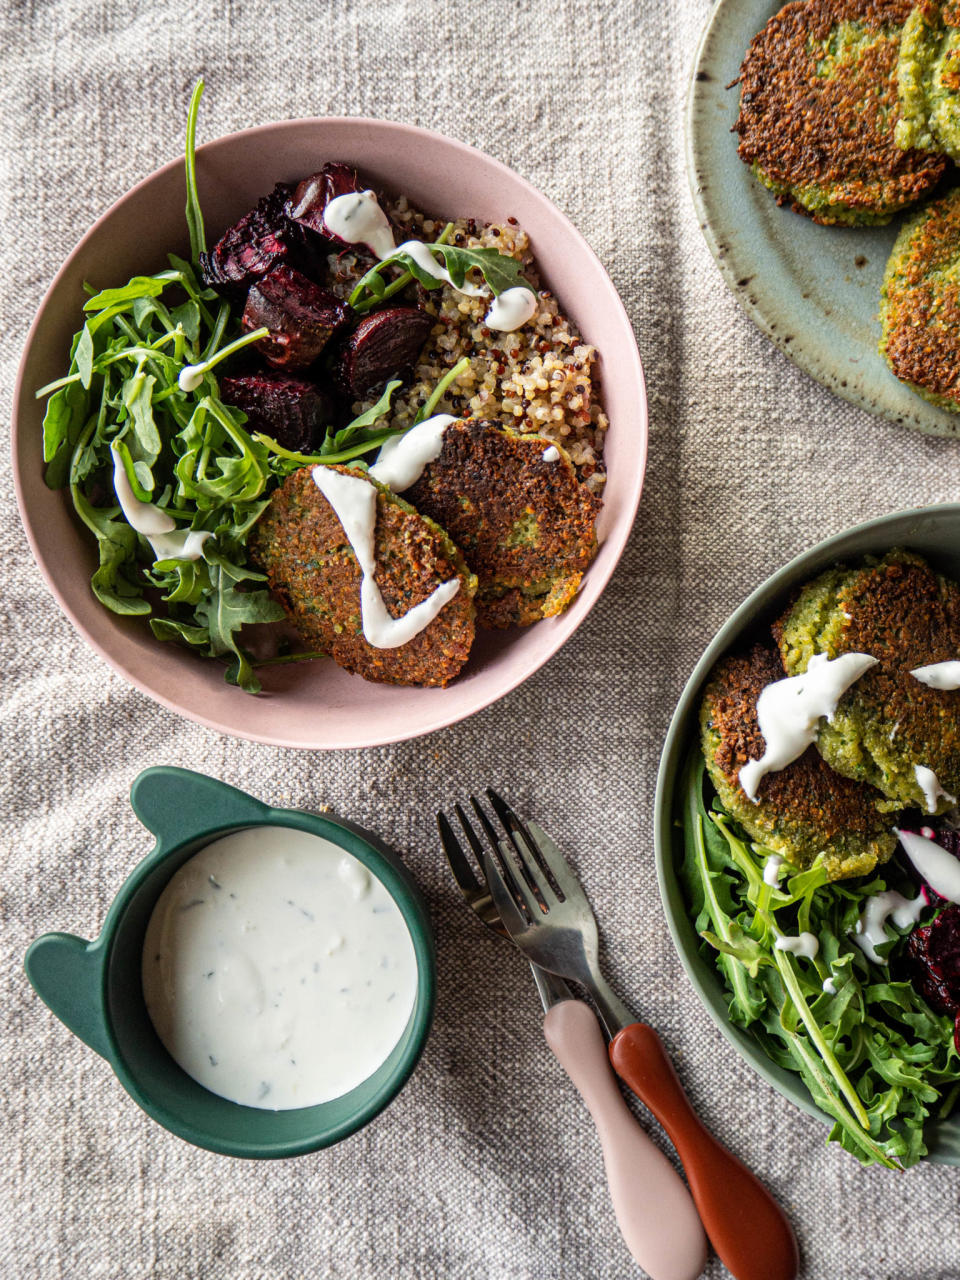 A meal with falafel, quinoa, beets, salad, and a bowl of sauce